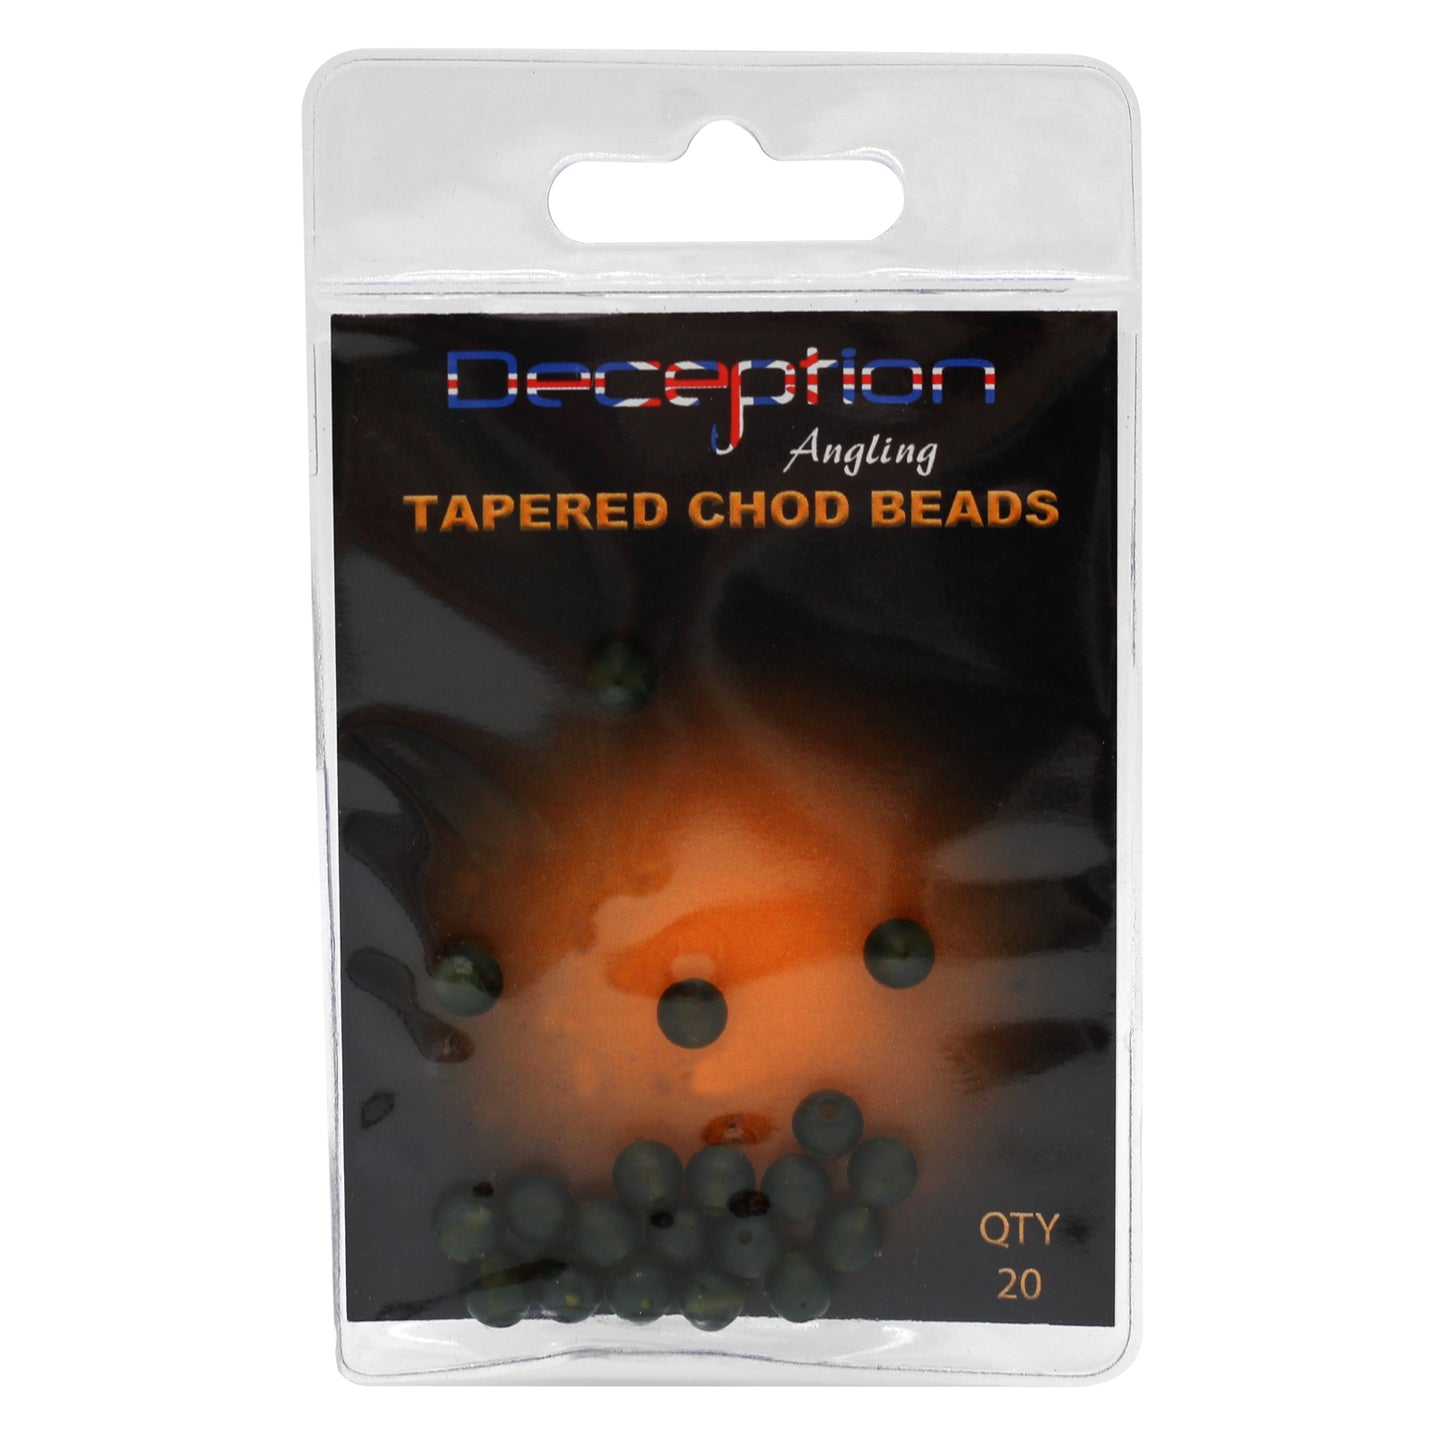 Deception Angling Tapered Chod Beads for Fishing Pack of 20